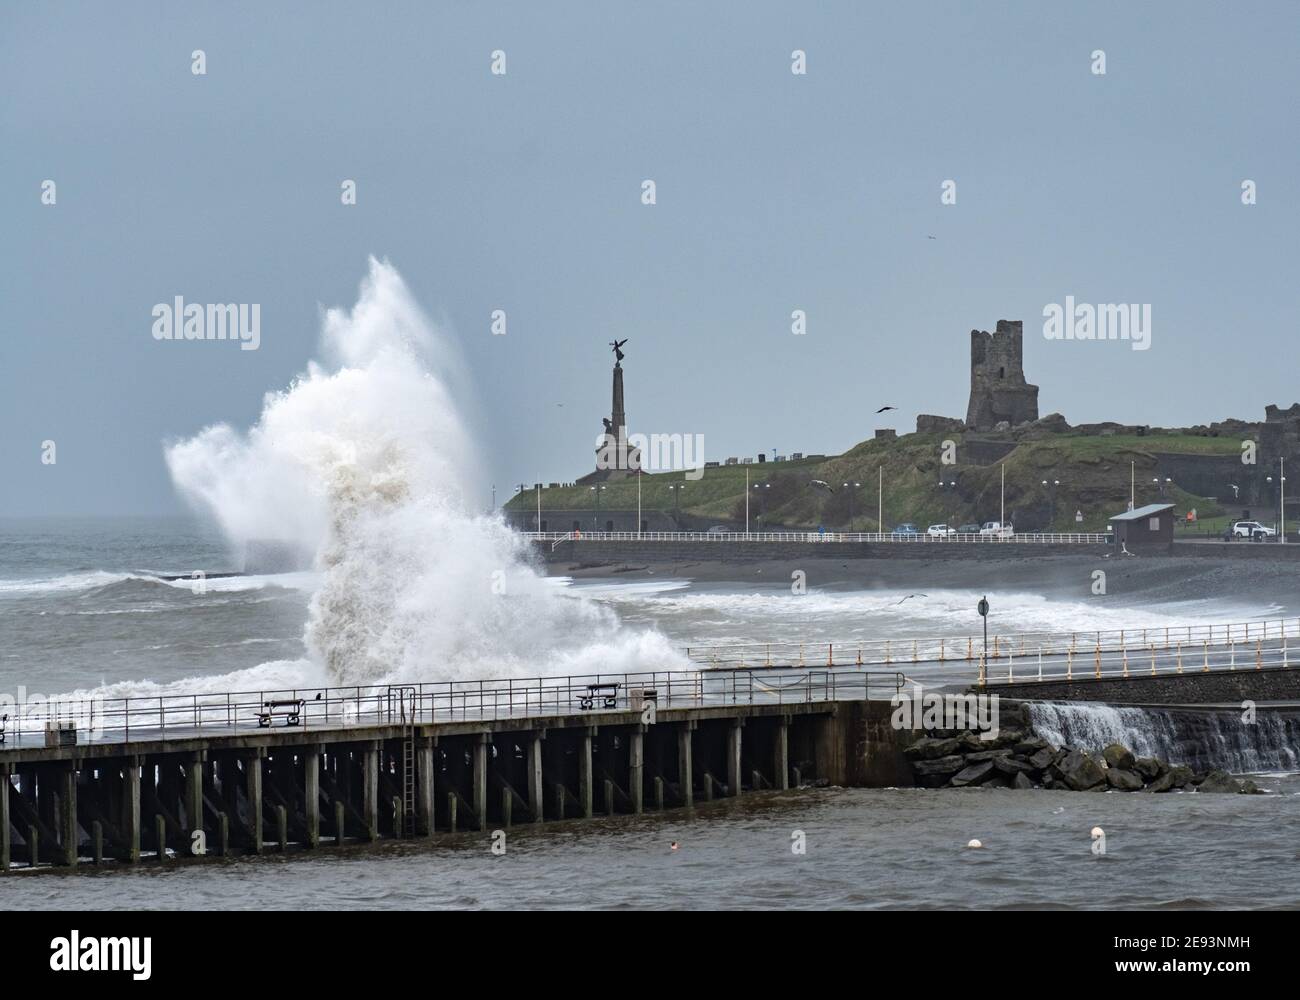 Gale force winds gusting at over 60mph and the morning’s high tide combine, bringing huge waves sweeping across the Irish Sea to batter the sea defences at Aberystwyth on the Cardigan Bay coast, West Wales UK Stock Photo